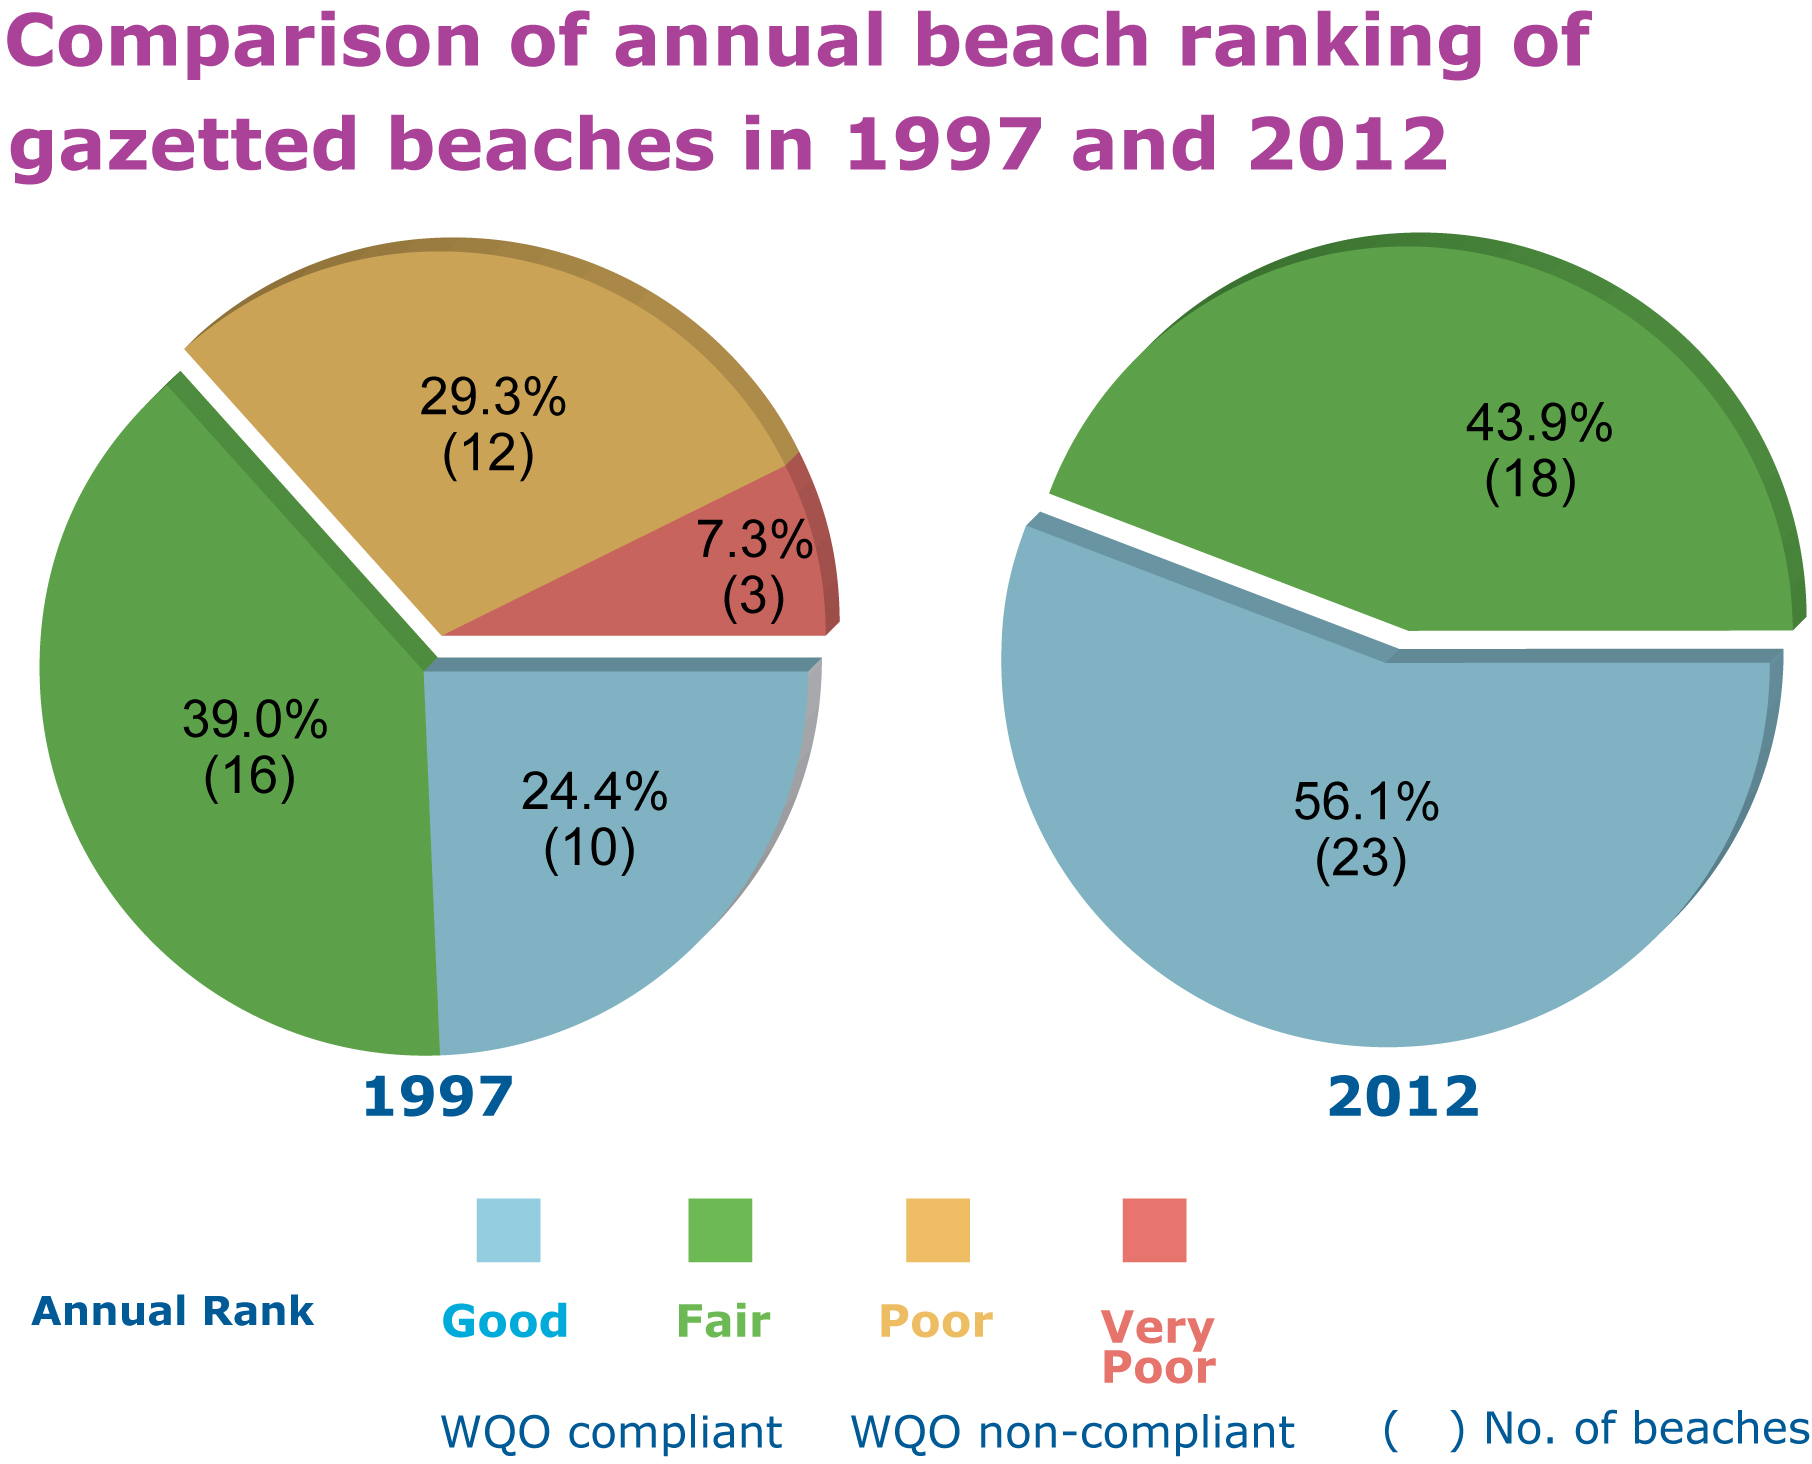 Annual beach ranking of 1997 and 2012 compared